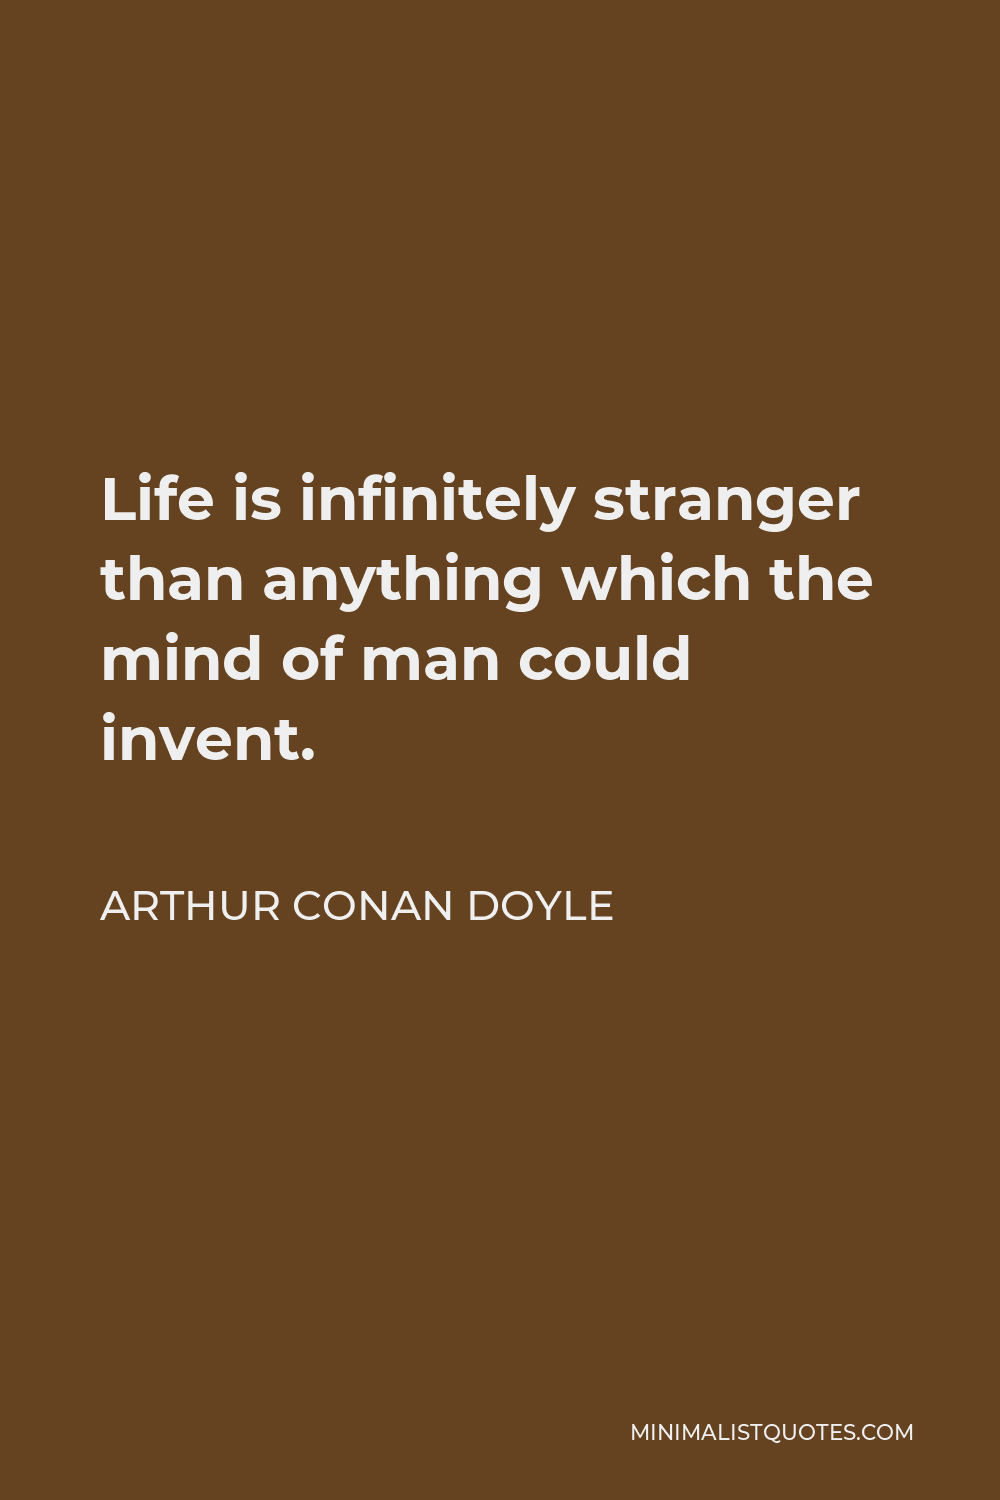 Arthur Conan Doyle Quote - Life is infinitely stranger than anything which the mind of man could invent.